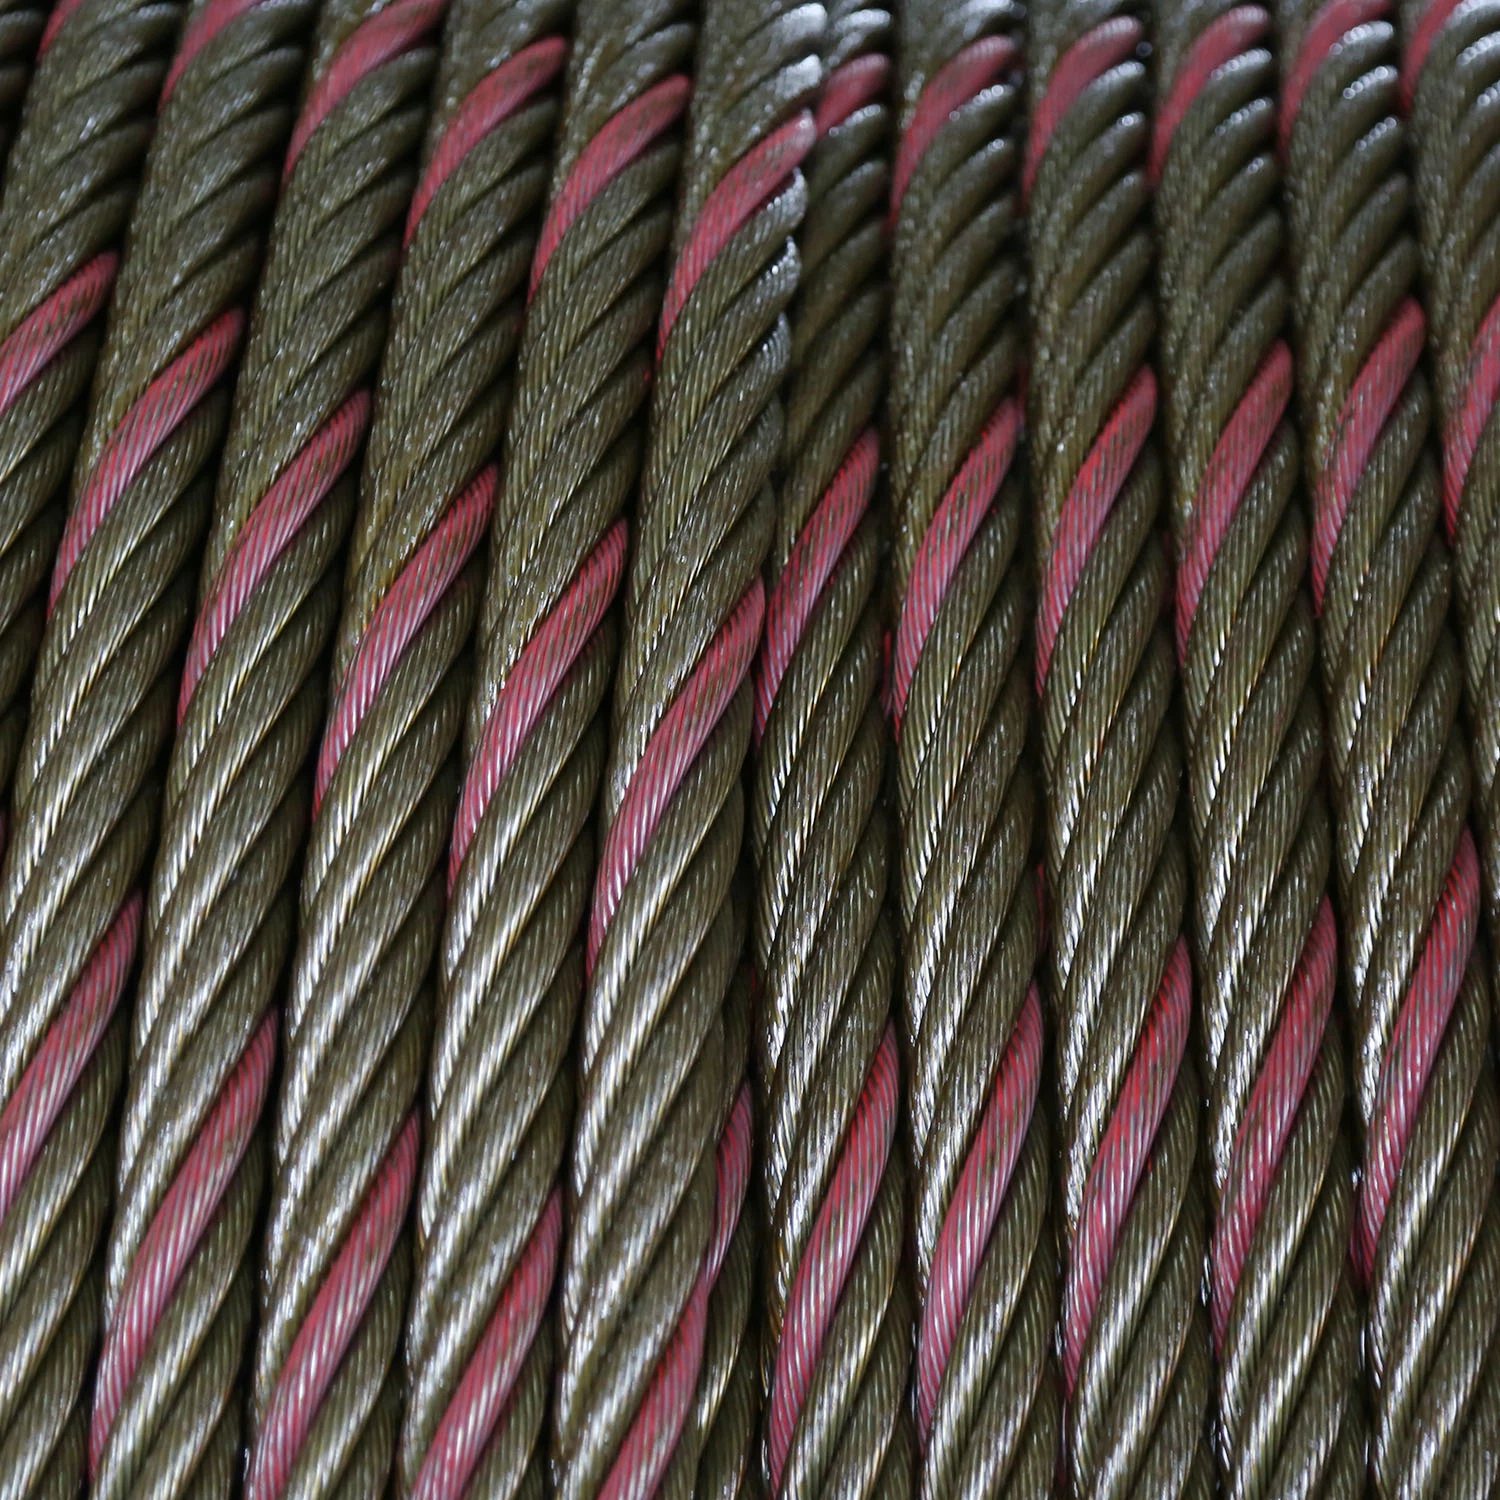 6X37+FC Ungalvanized Steel Wire Rope with One Color Strand Surface Lubrication Treatment